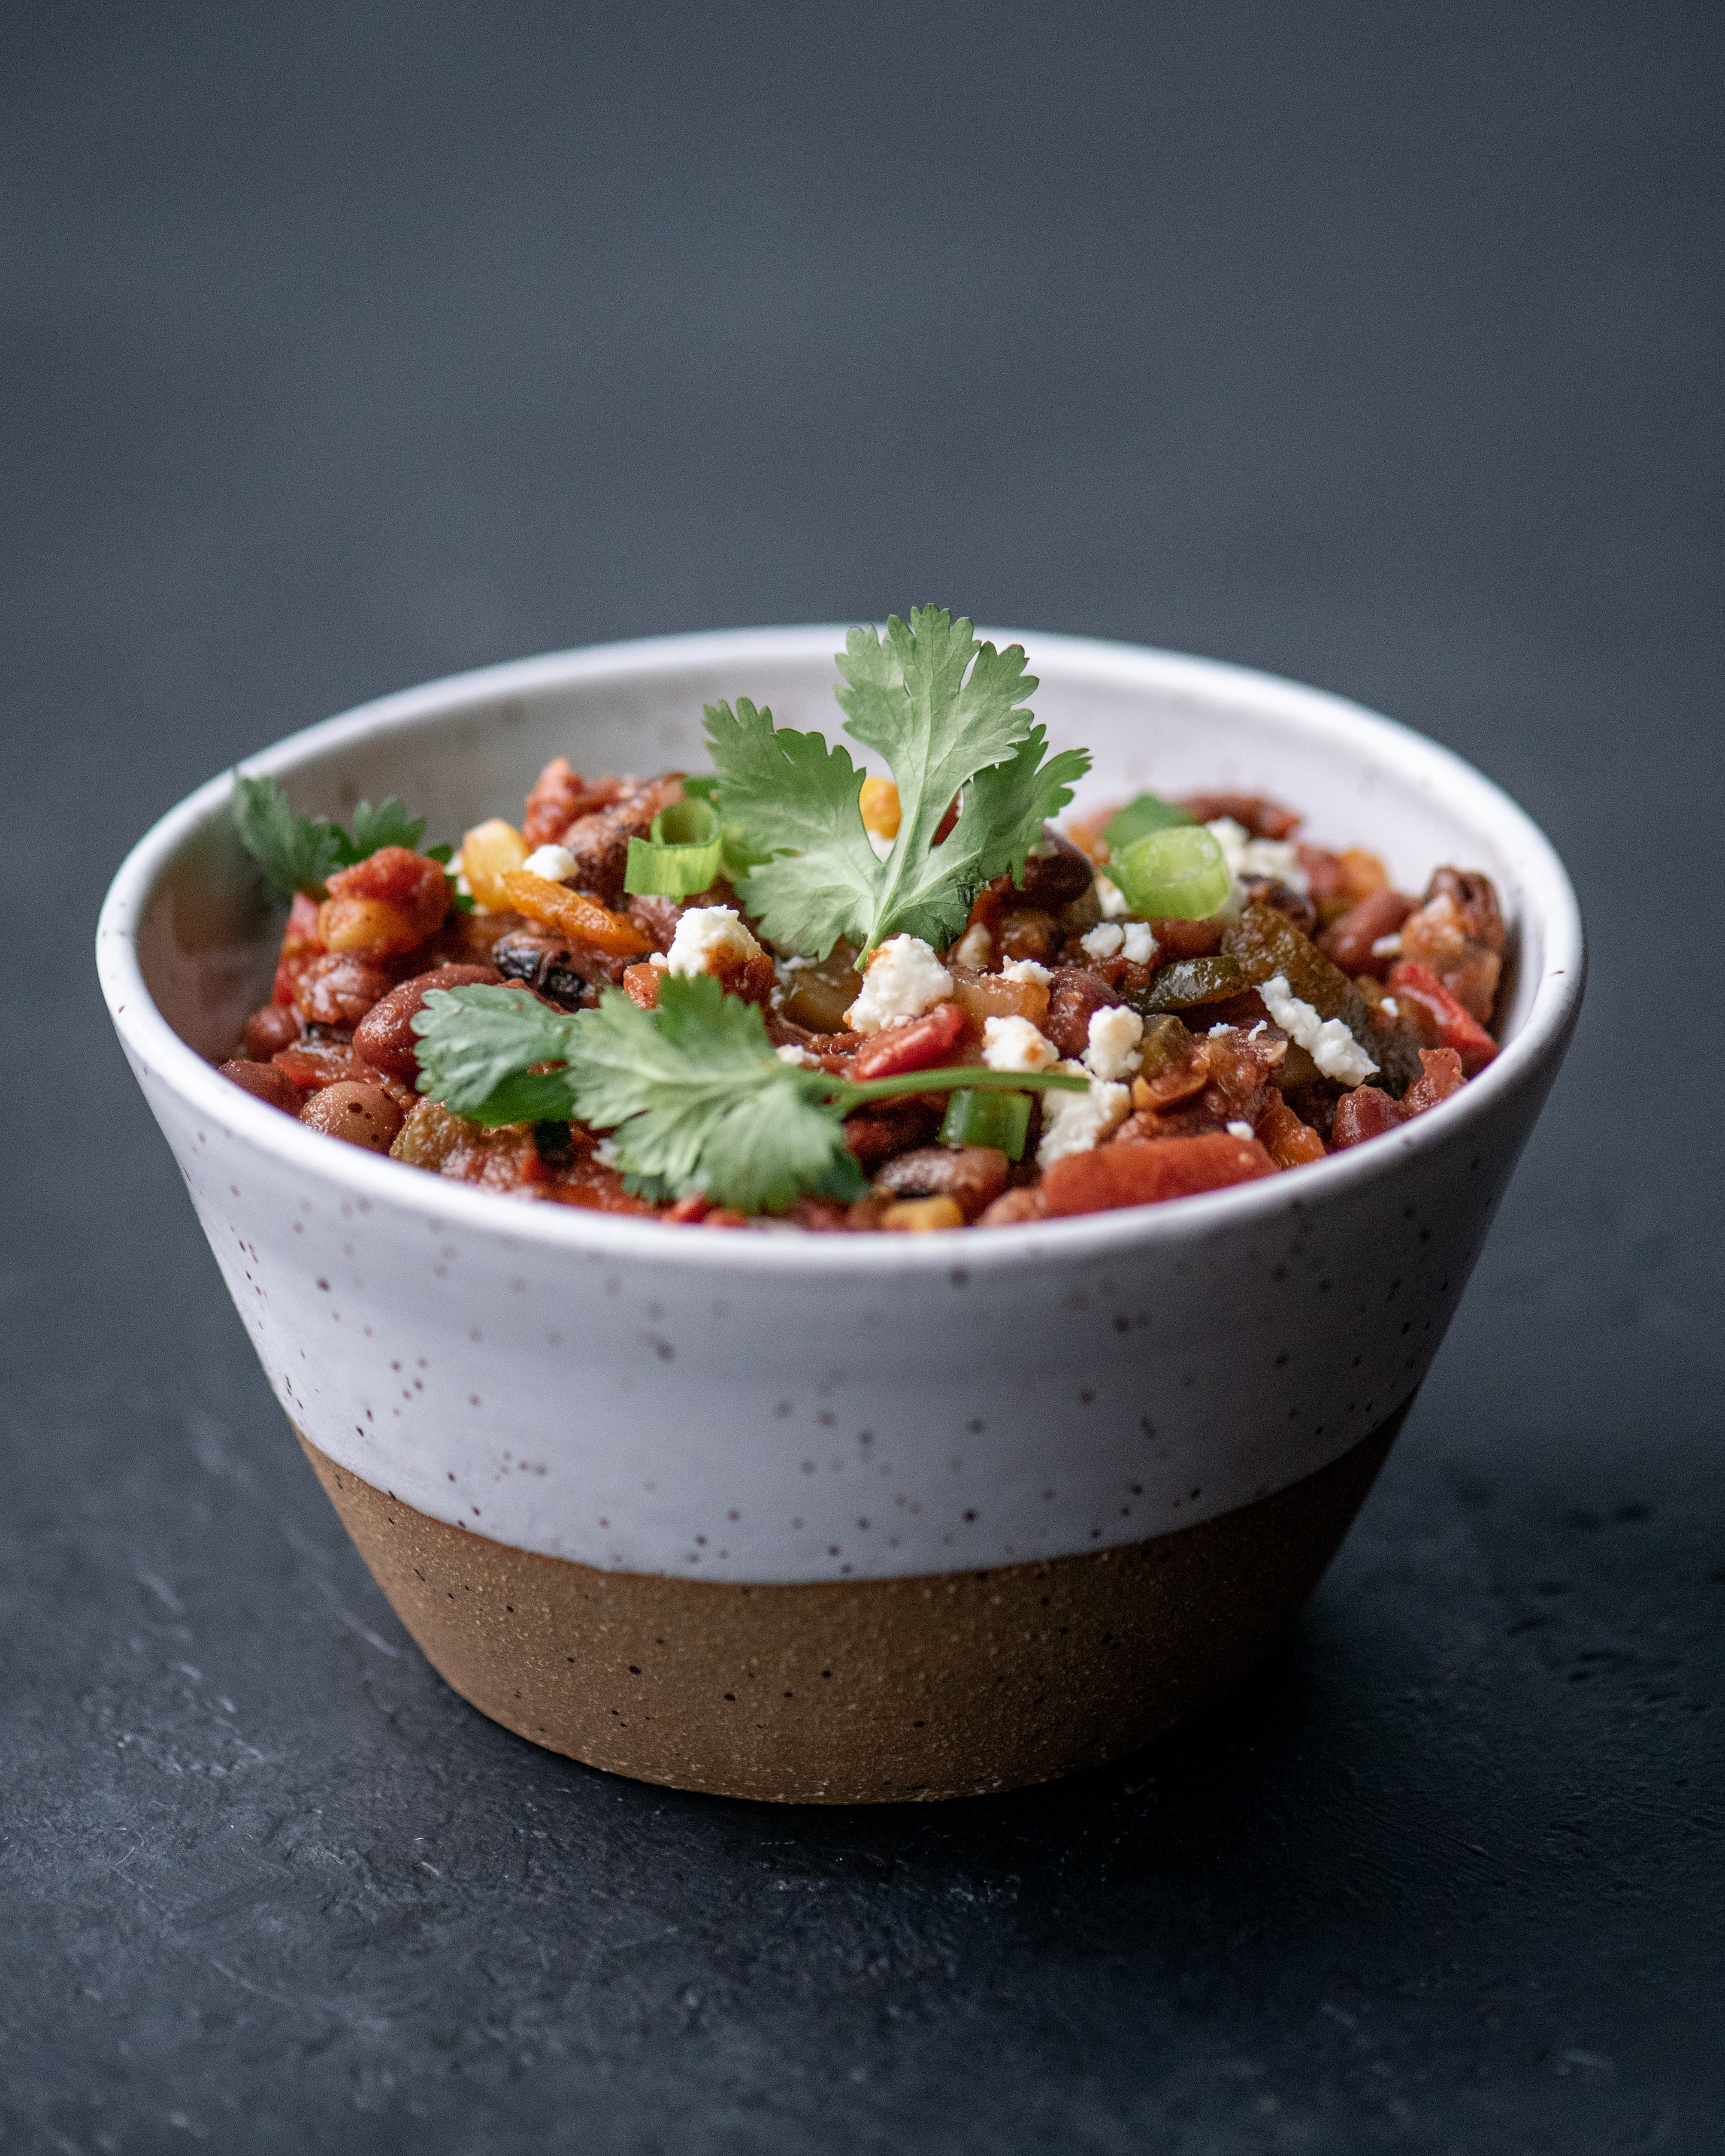 7 Vegetarian Chili Recipes That Are Anything But Boring